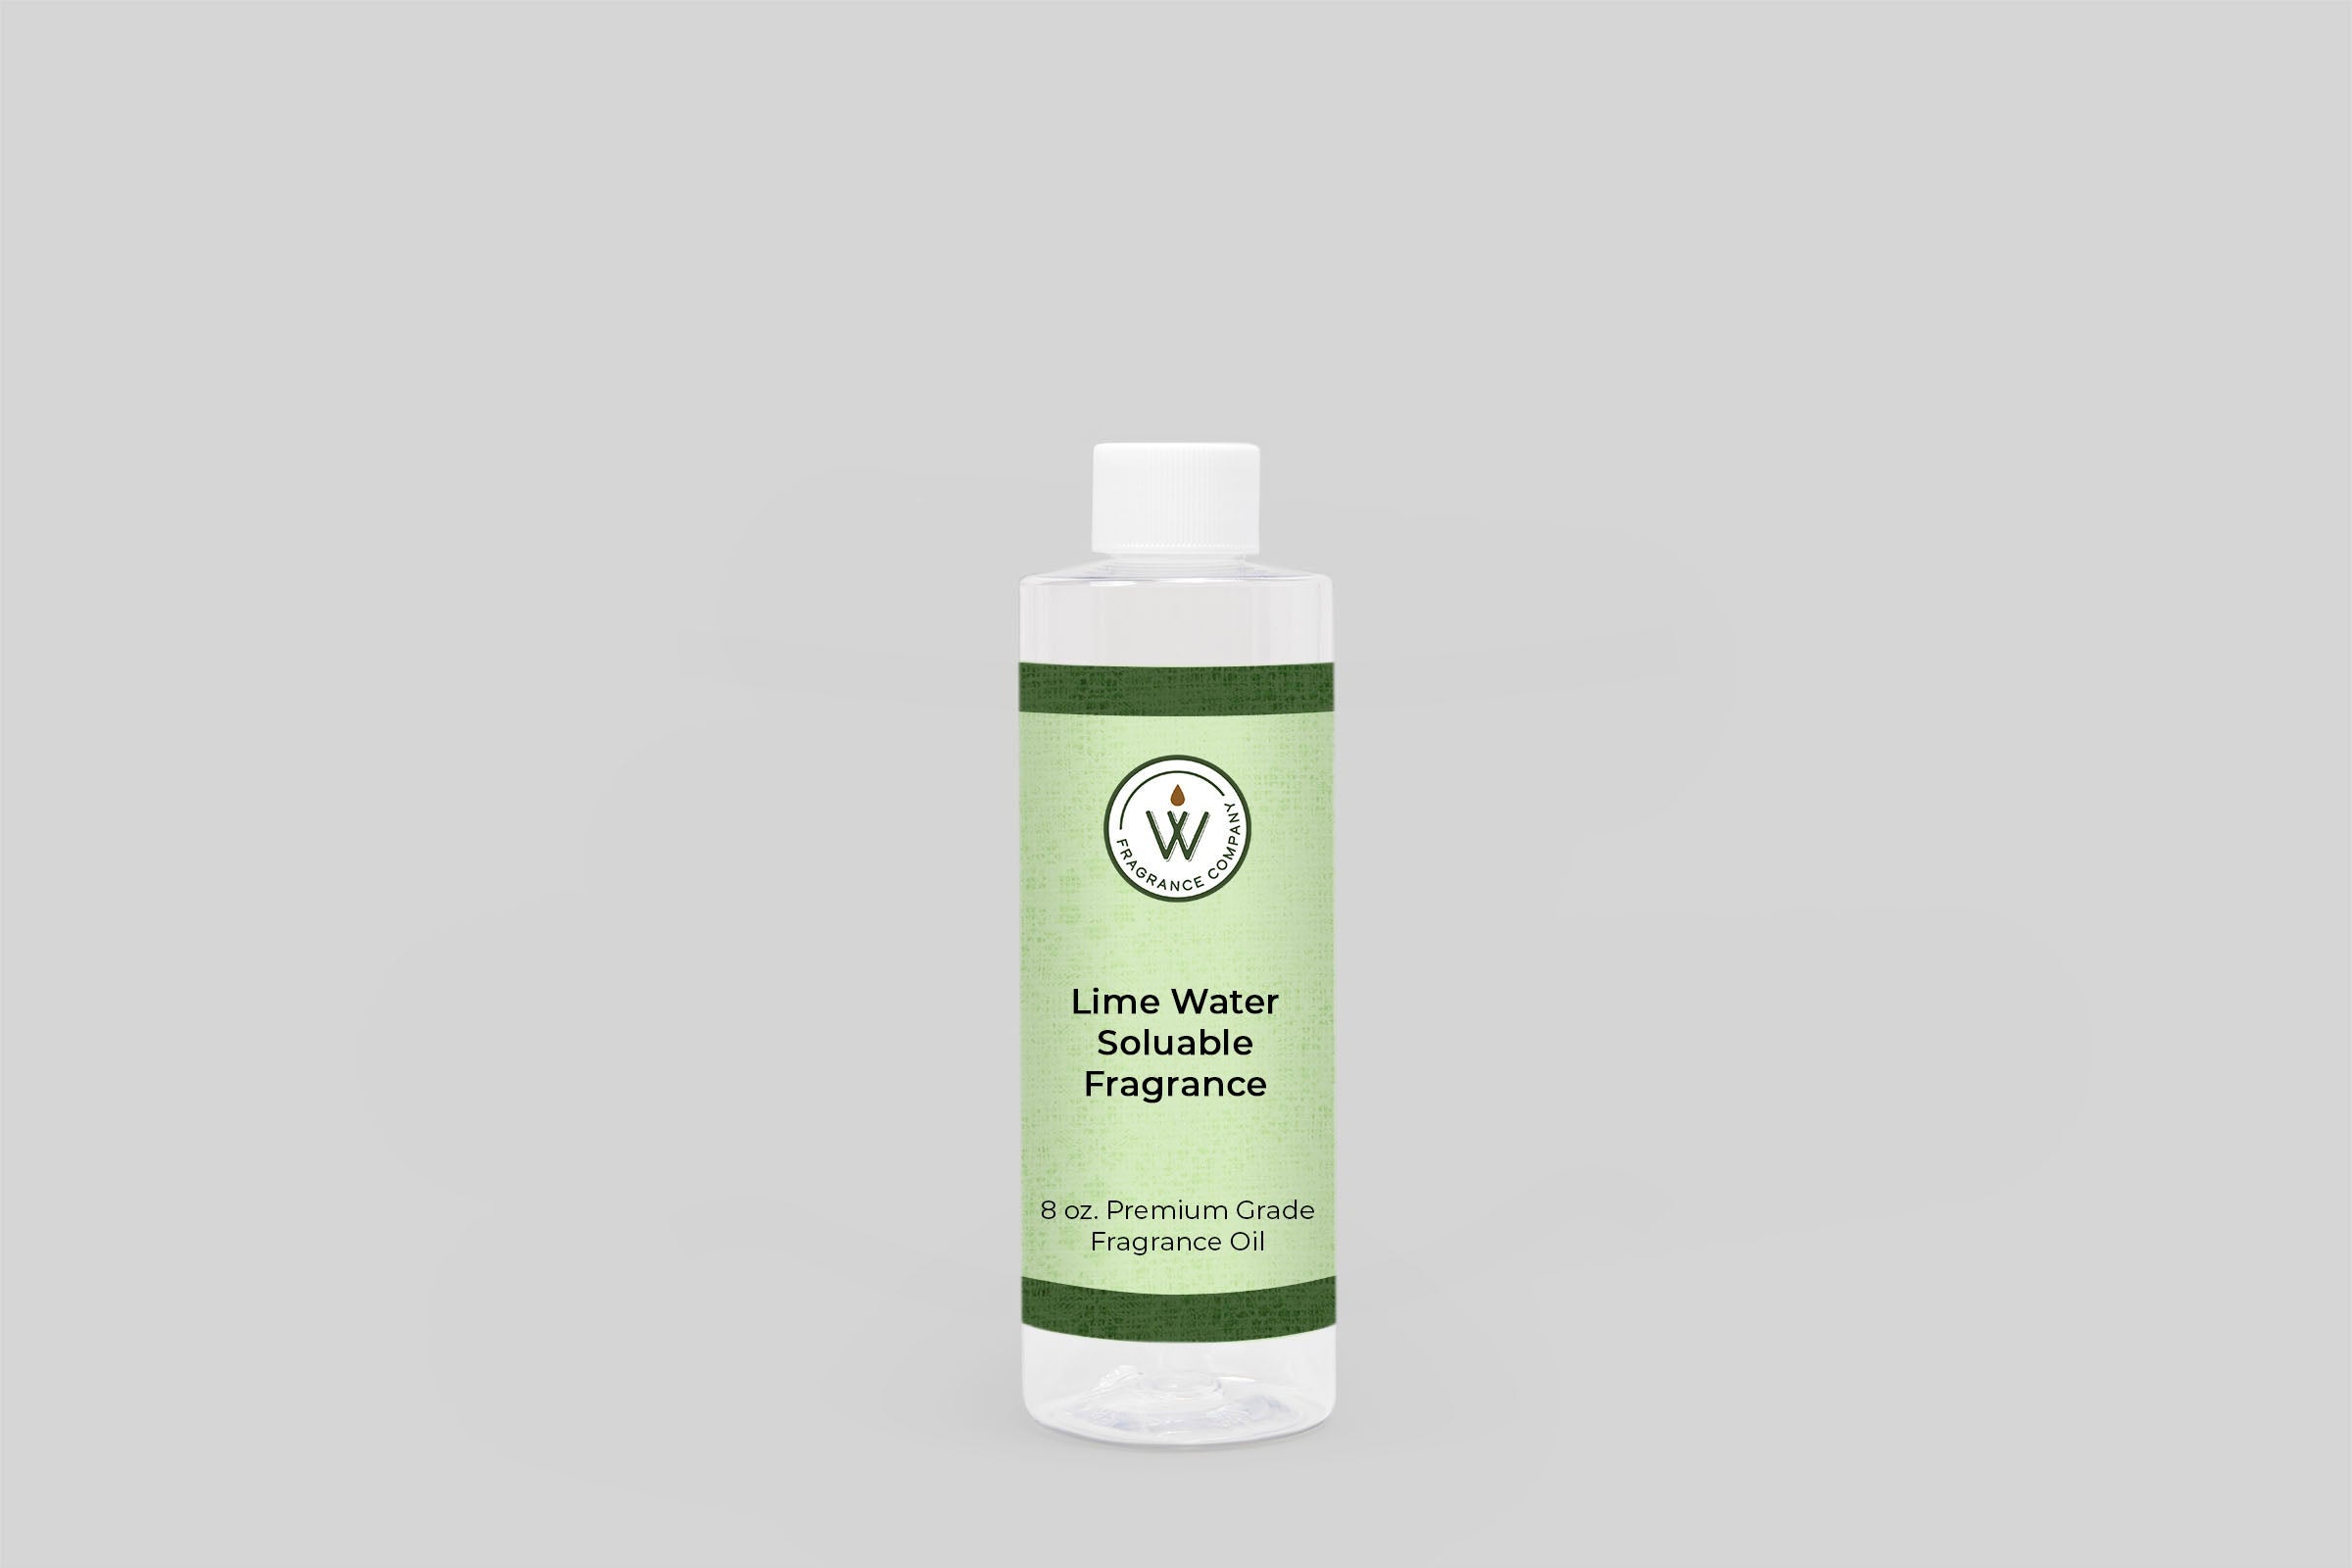 Lime Water Soluble Fragrance